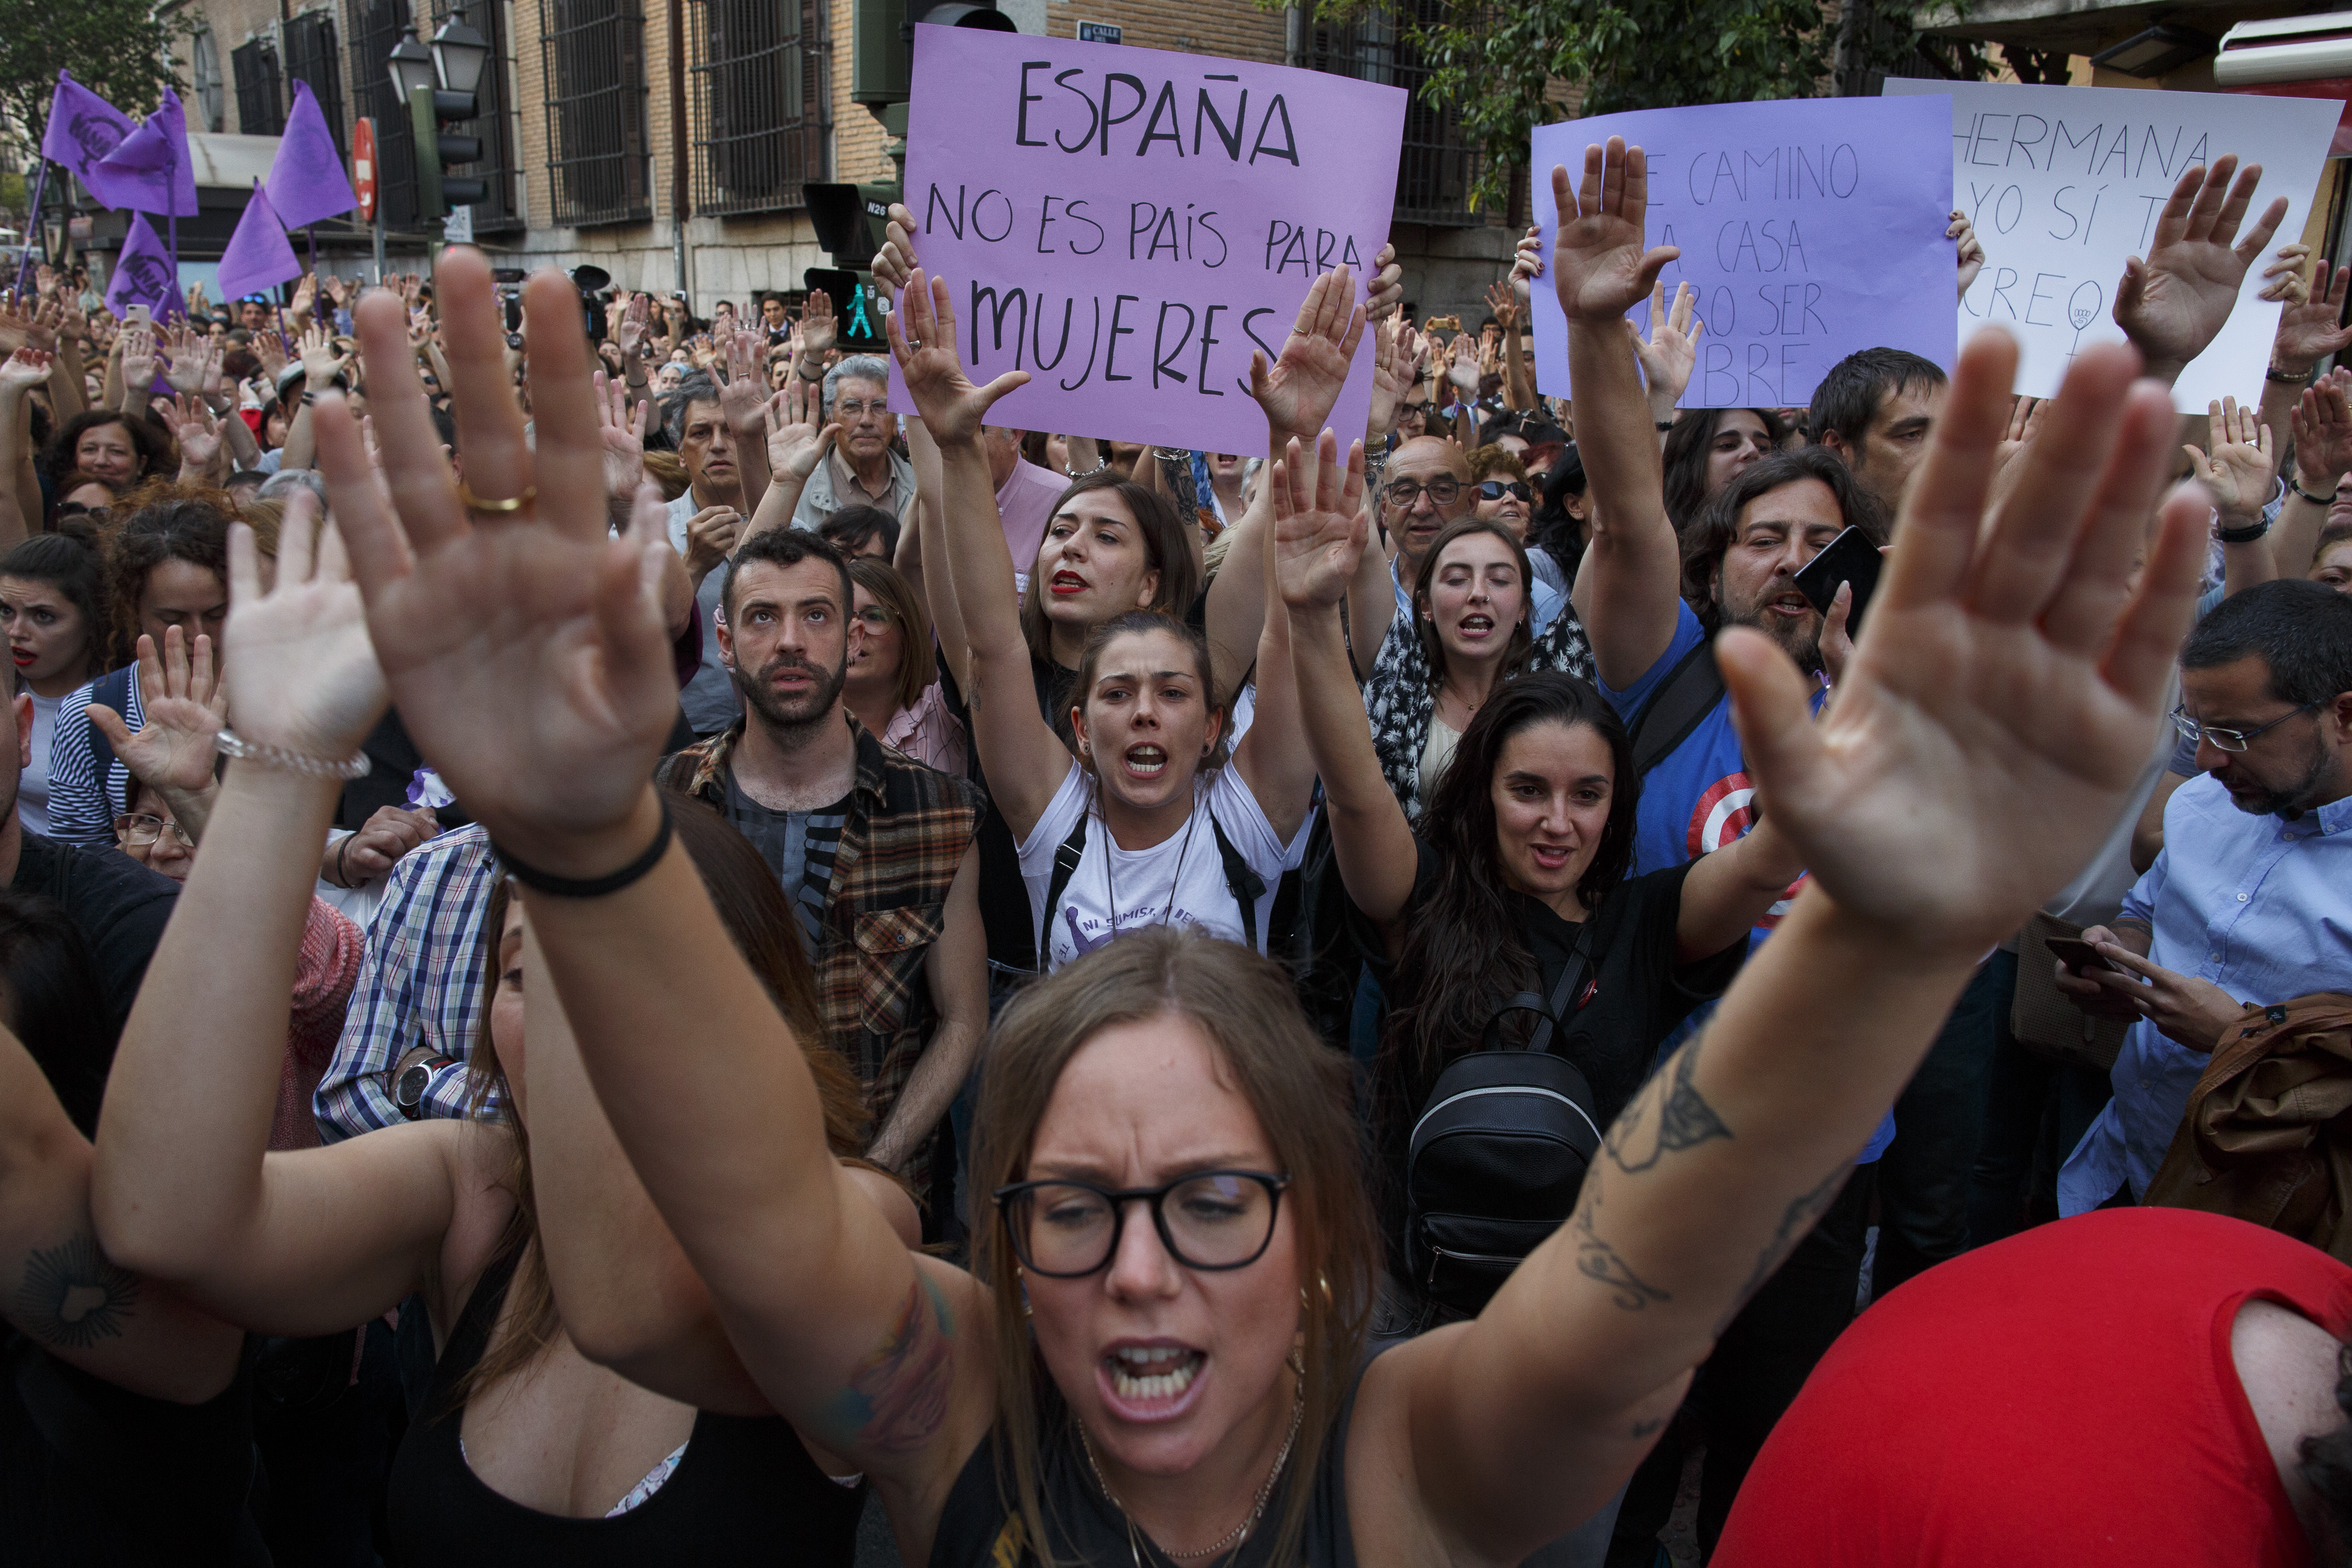 A protester holds a placard reading 'Spain is not a country for women' during a demonstration against the verdict of the 'La Manada' (Wolf Pack) gang case outside the Minister of Justice in Madrid, Spain on April 26, 2018. (Pablo Blazquez Dominguez—Getty Images)